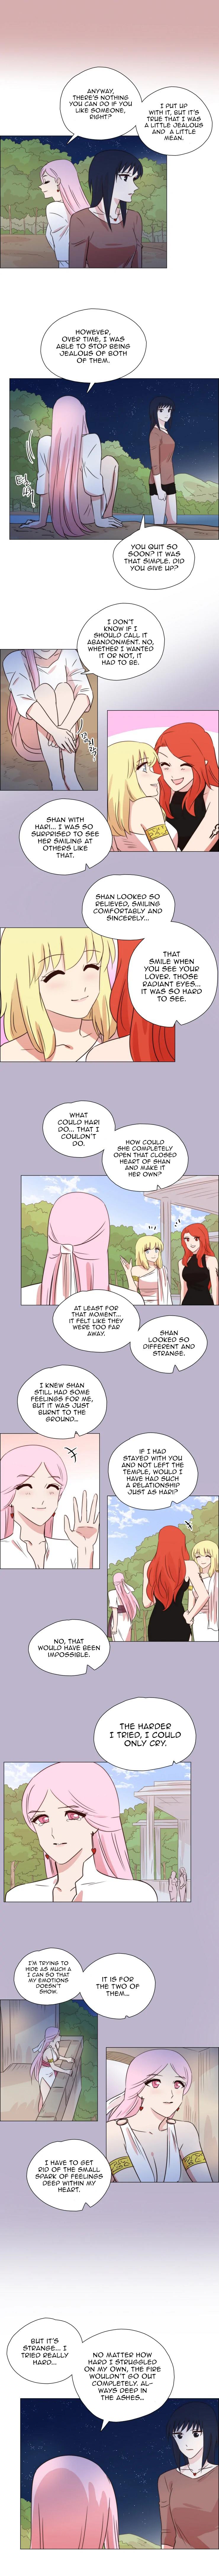 Miss Angel And Miss Devil Chapter 277: Ep 30 - Hold Your Hand In Mine (17) page 6 - Mangakakalot